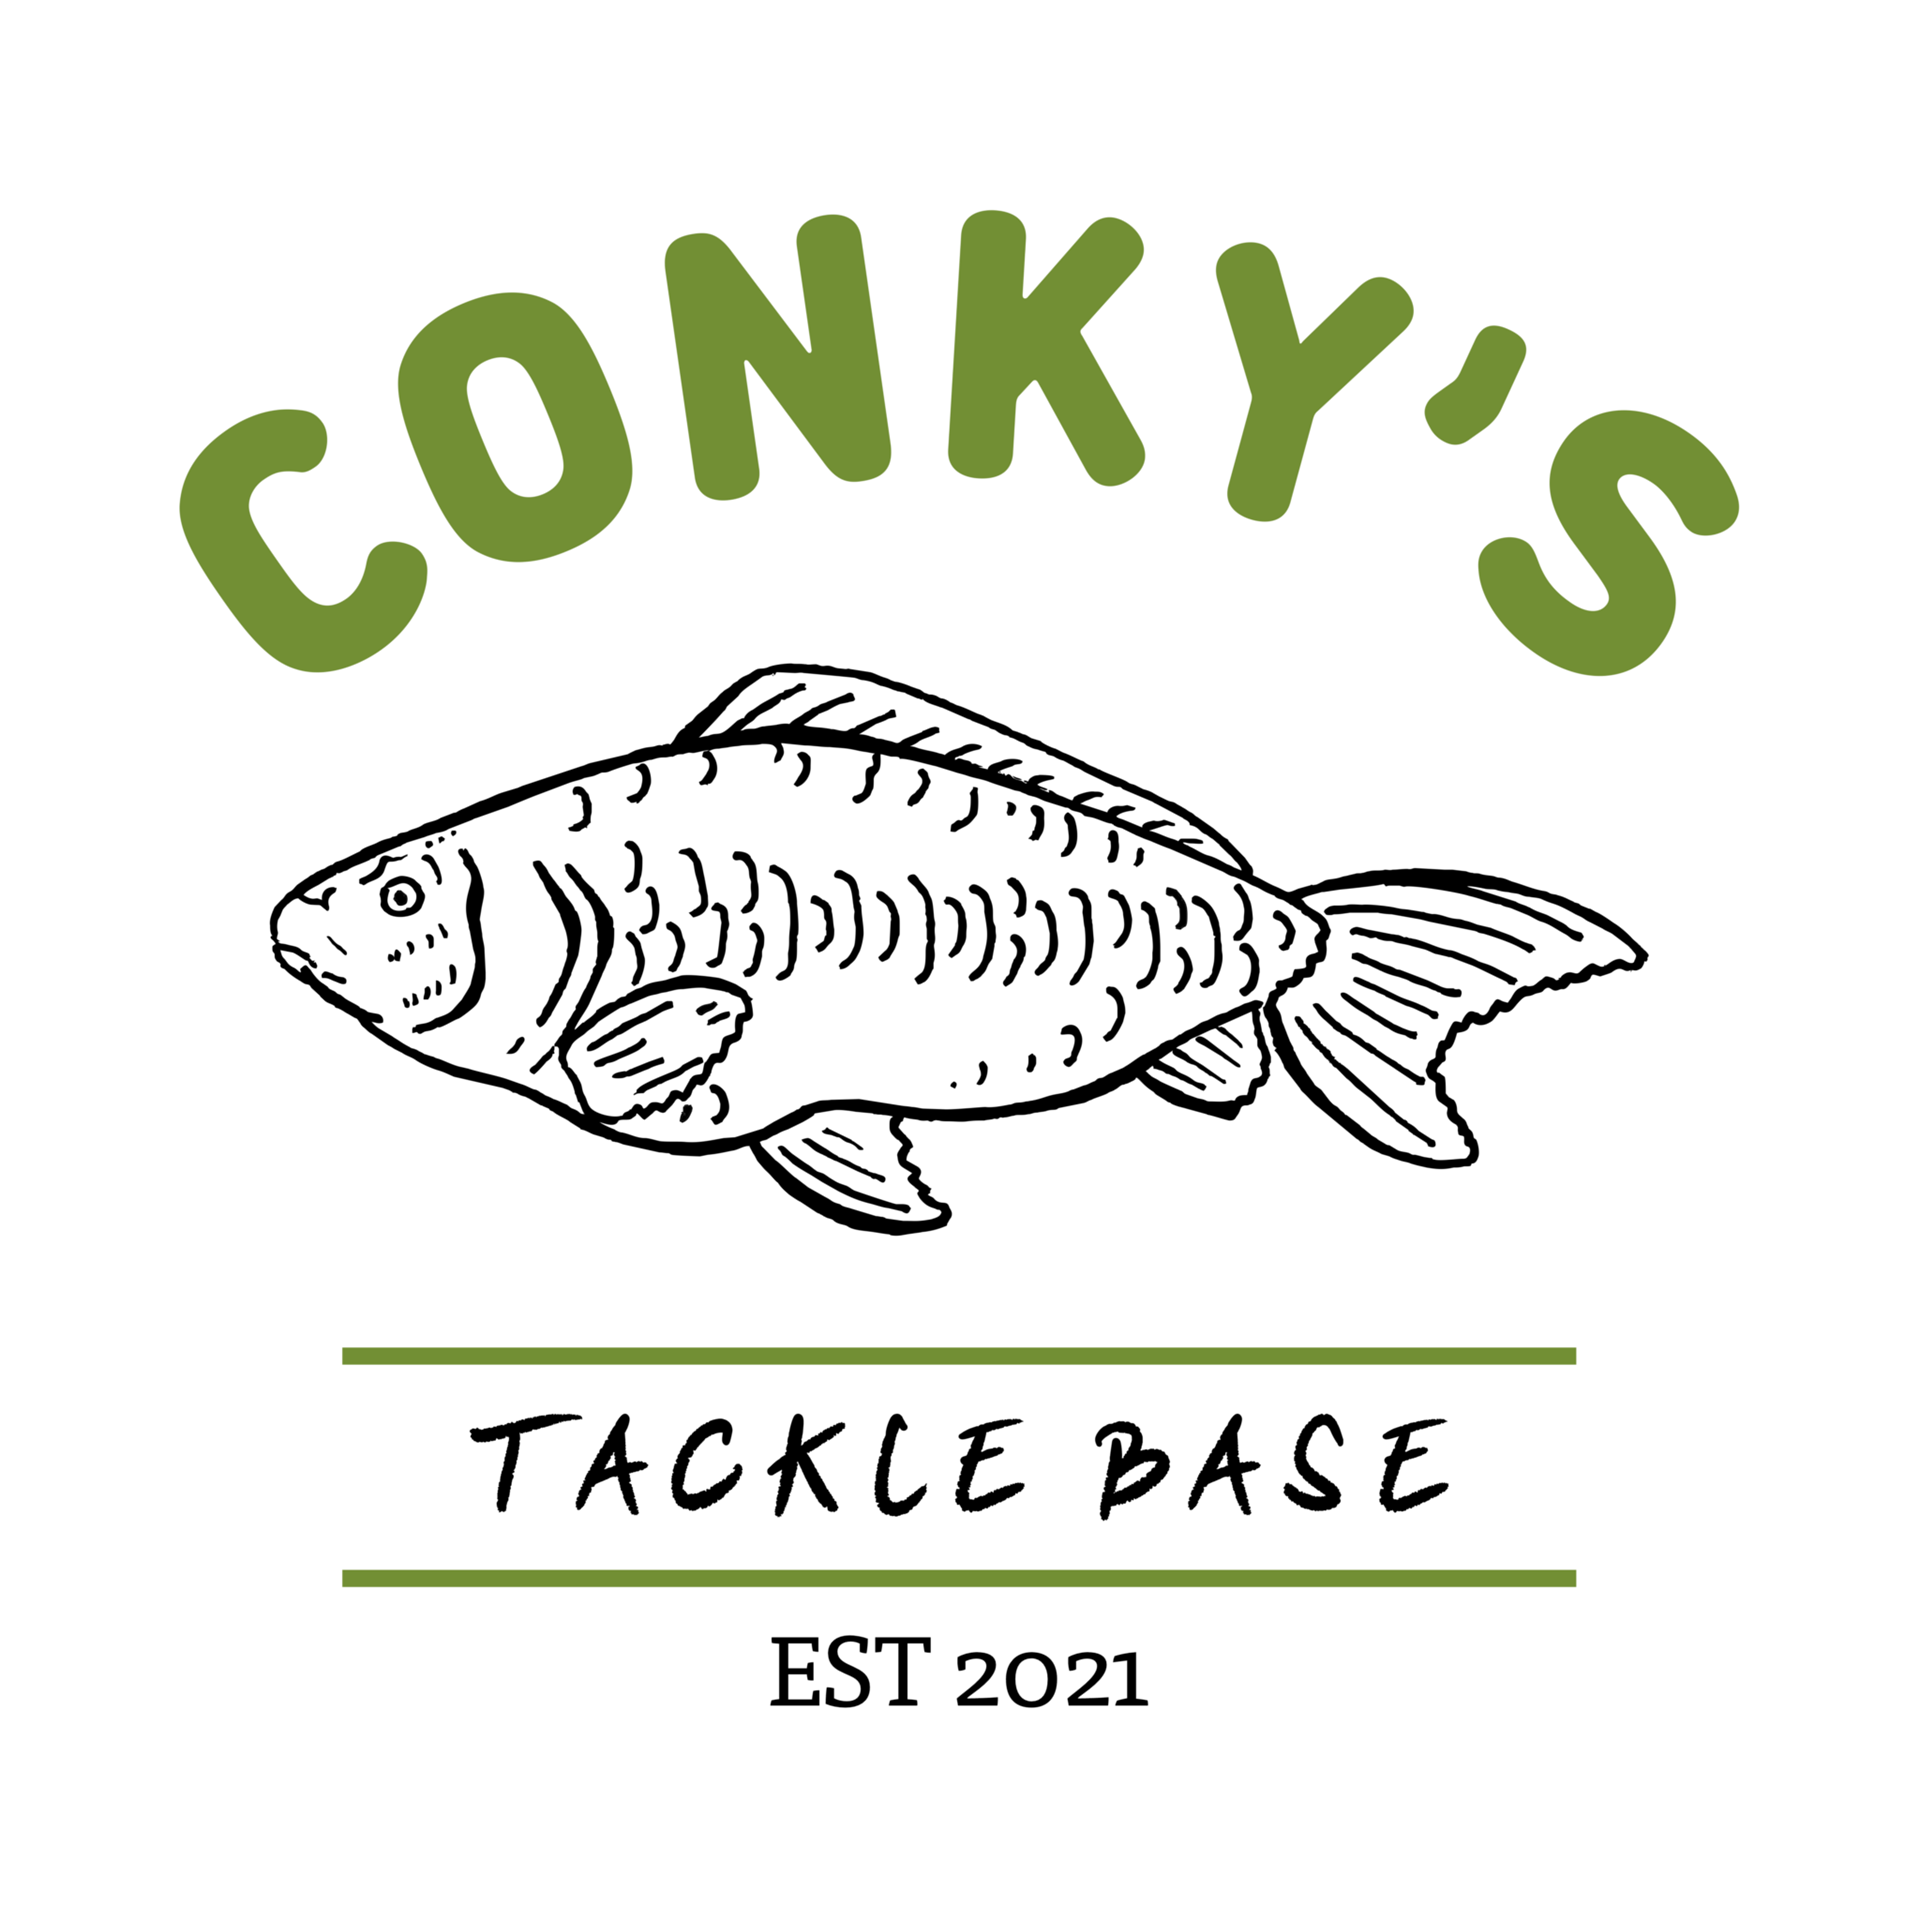 Conky's Tackle base